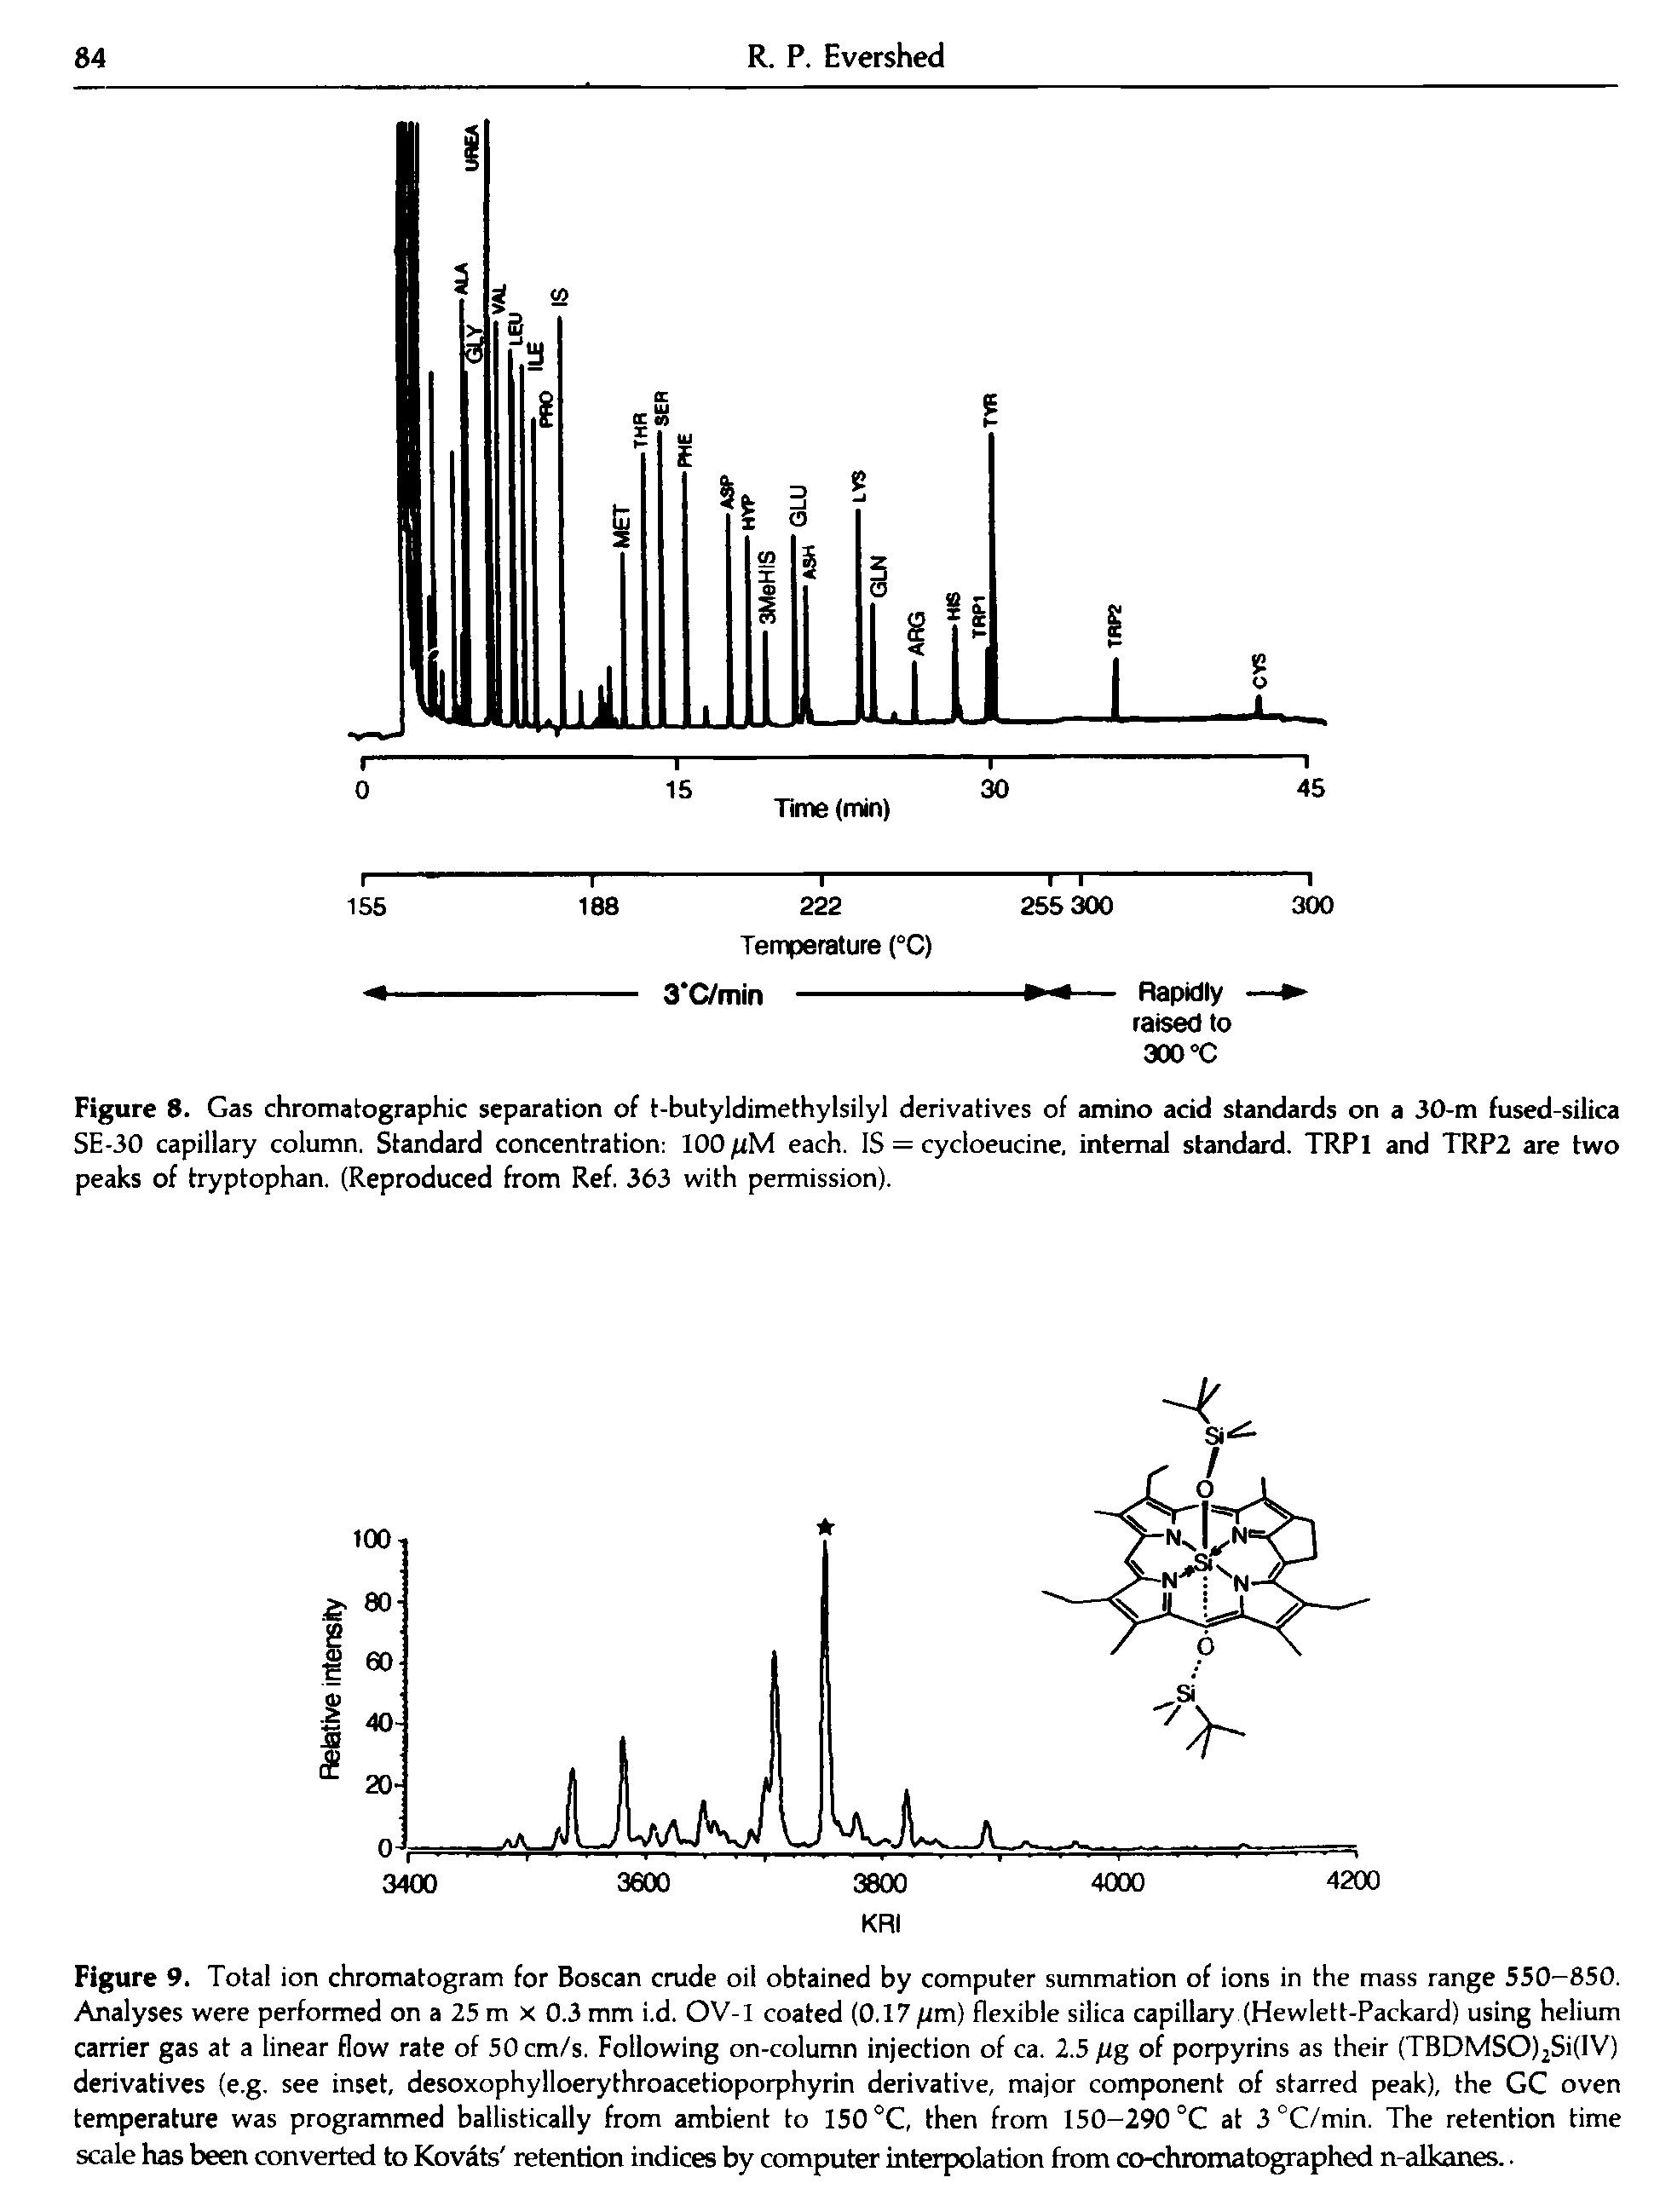 Figure 9. Total ion chromatogram for Boscan crude oil obtained by computer summation of ions in the mass range 550—850. Analyses were performed on a 25 m x 0.3 mm i.d. OV-I coated (0.17//m) flexible silica capillary (Hewlett-Packard) using helium carrier gas at a linear flow rate of 50 cm/s. Following on-column injection of ca. 2.5 fig of porpyrins as their (TBDMSO)2Si(IV) derivatives (e.g. see inset, desoxophylloerythroacetioporphyrin derivative, major component of starred peak), the GC oven temperature was programmed ballistically from ambient to 150 °C, then from 150-290 °C at 3°C/min. The retention time scale has been converted to Kovats retention indices by computer interpolation from co-chromatographed n-alkanes..